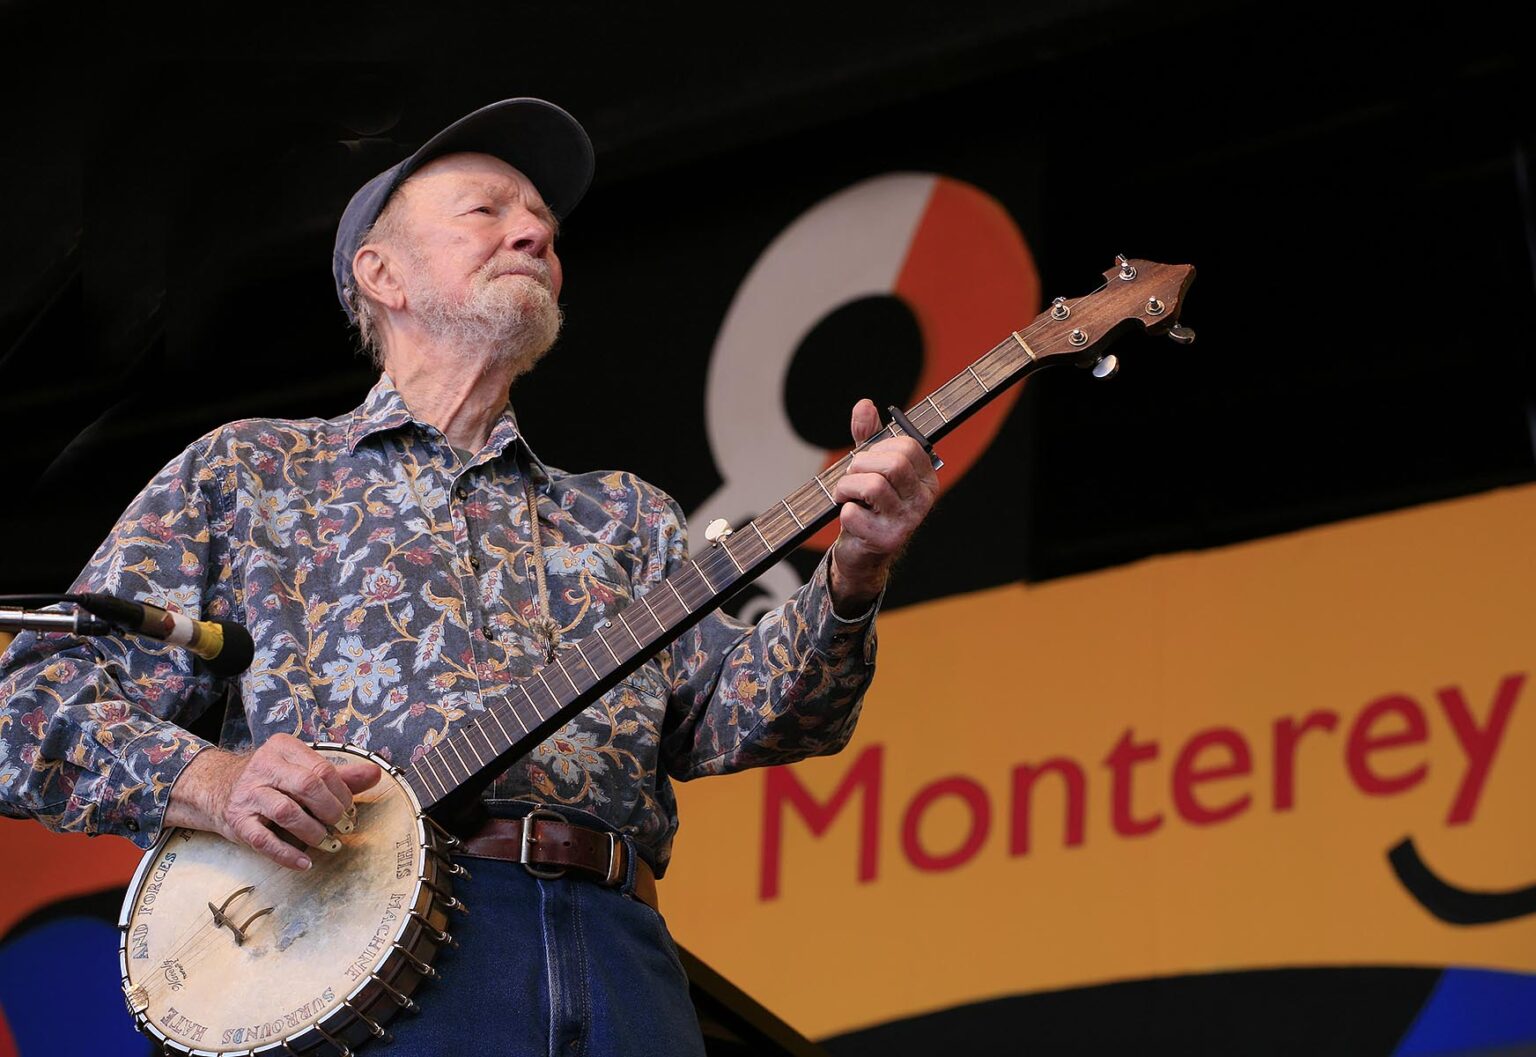 PETE SEEGER sings at the 2009 MONTEREY JAZZ FESTIVAL - CALIFORNIA